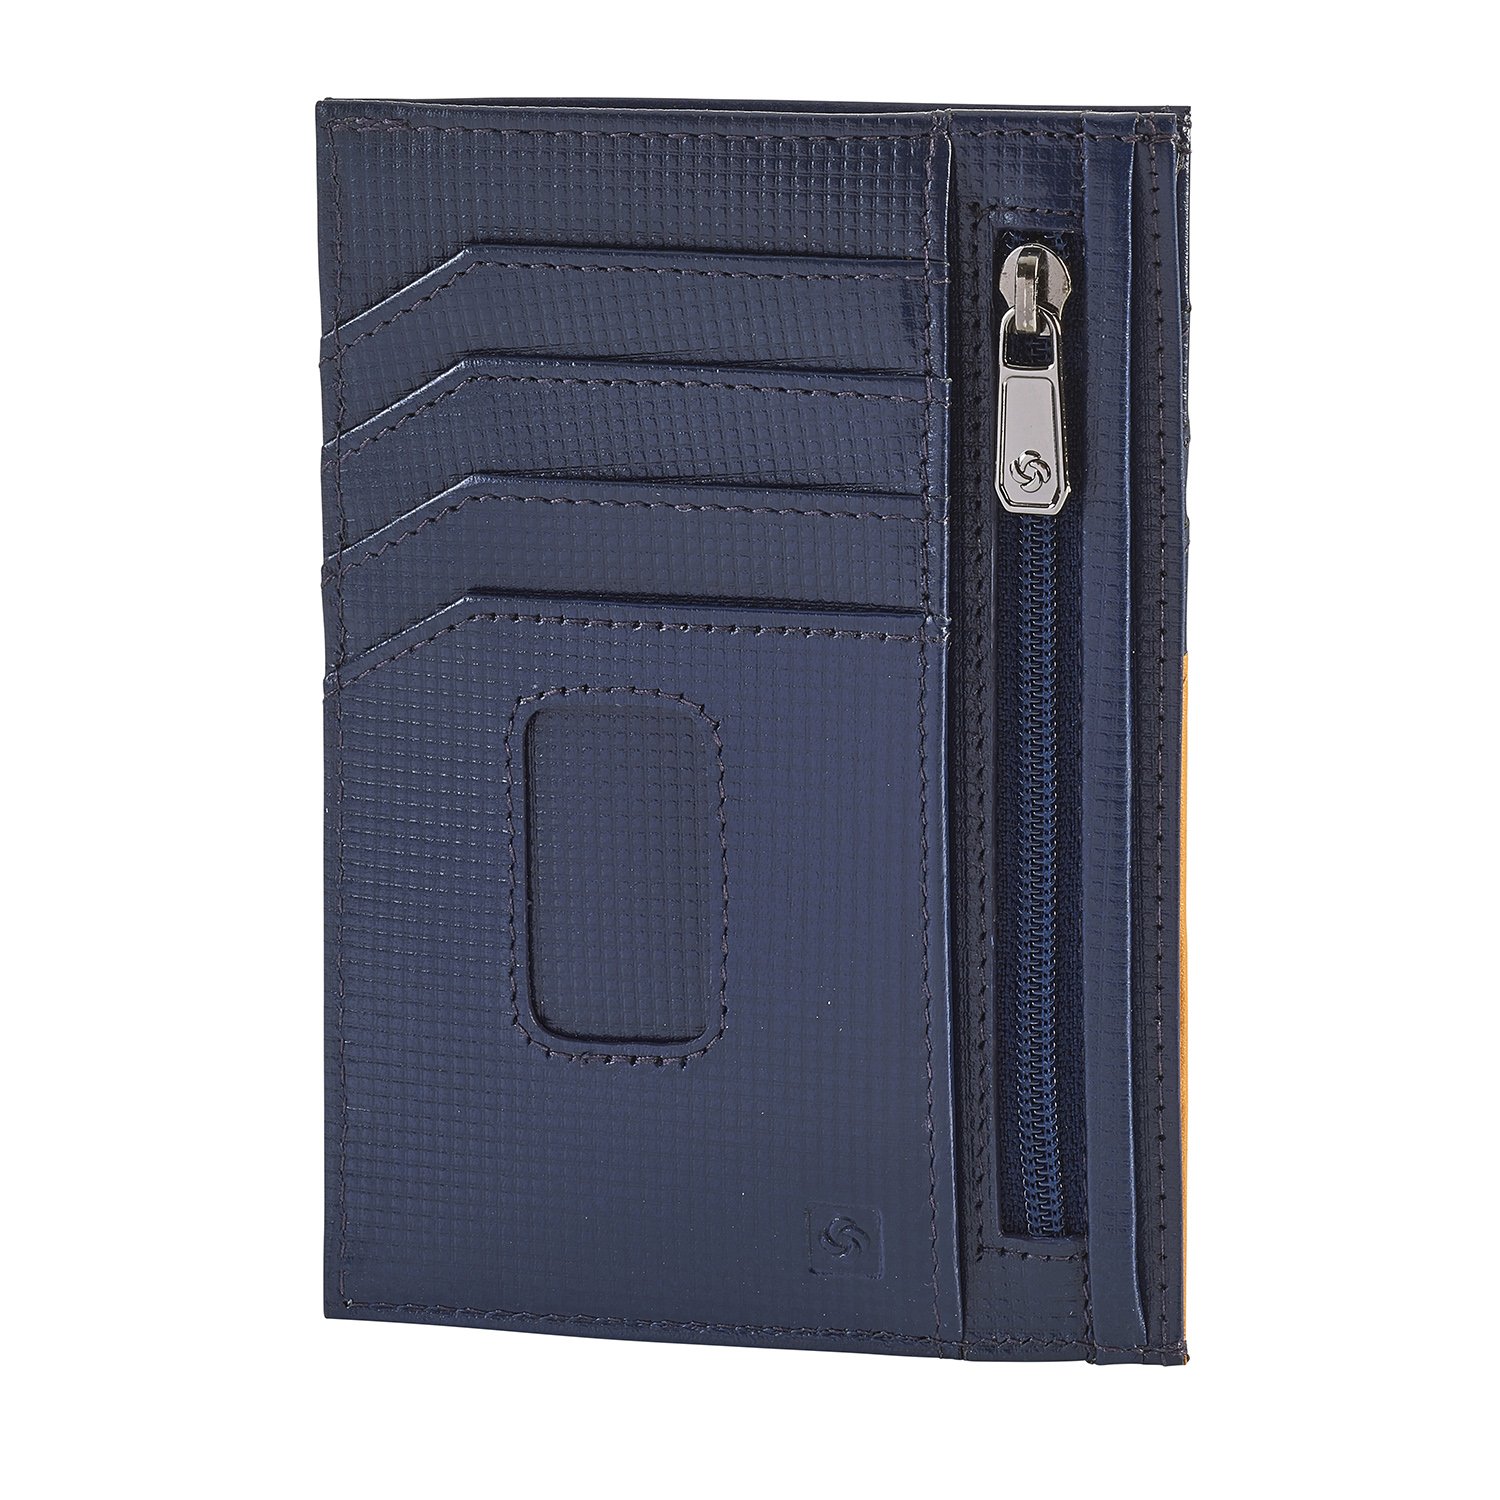 TINT SLG-726 - ALL IN ONE WALLET SCJ1-726-SF000*01